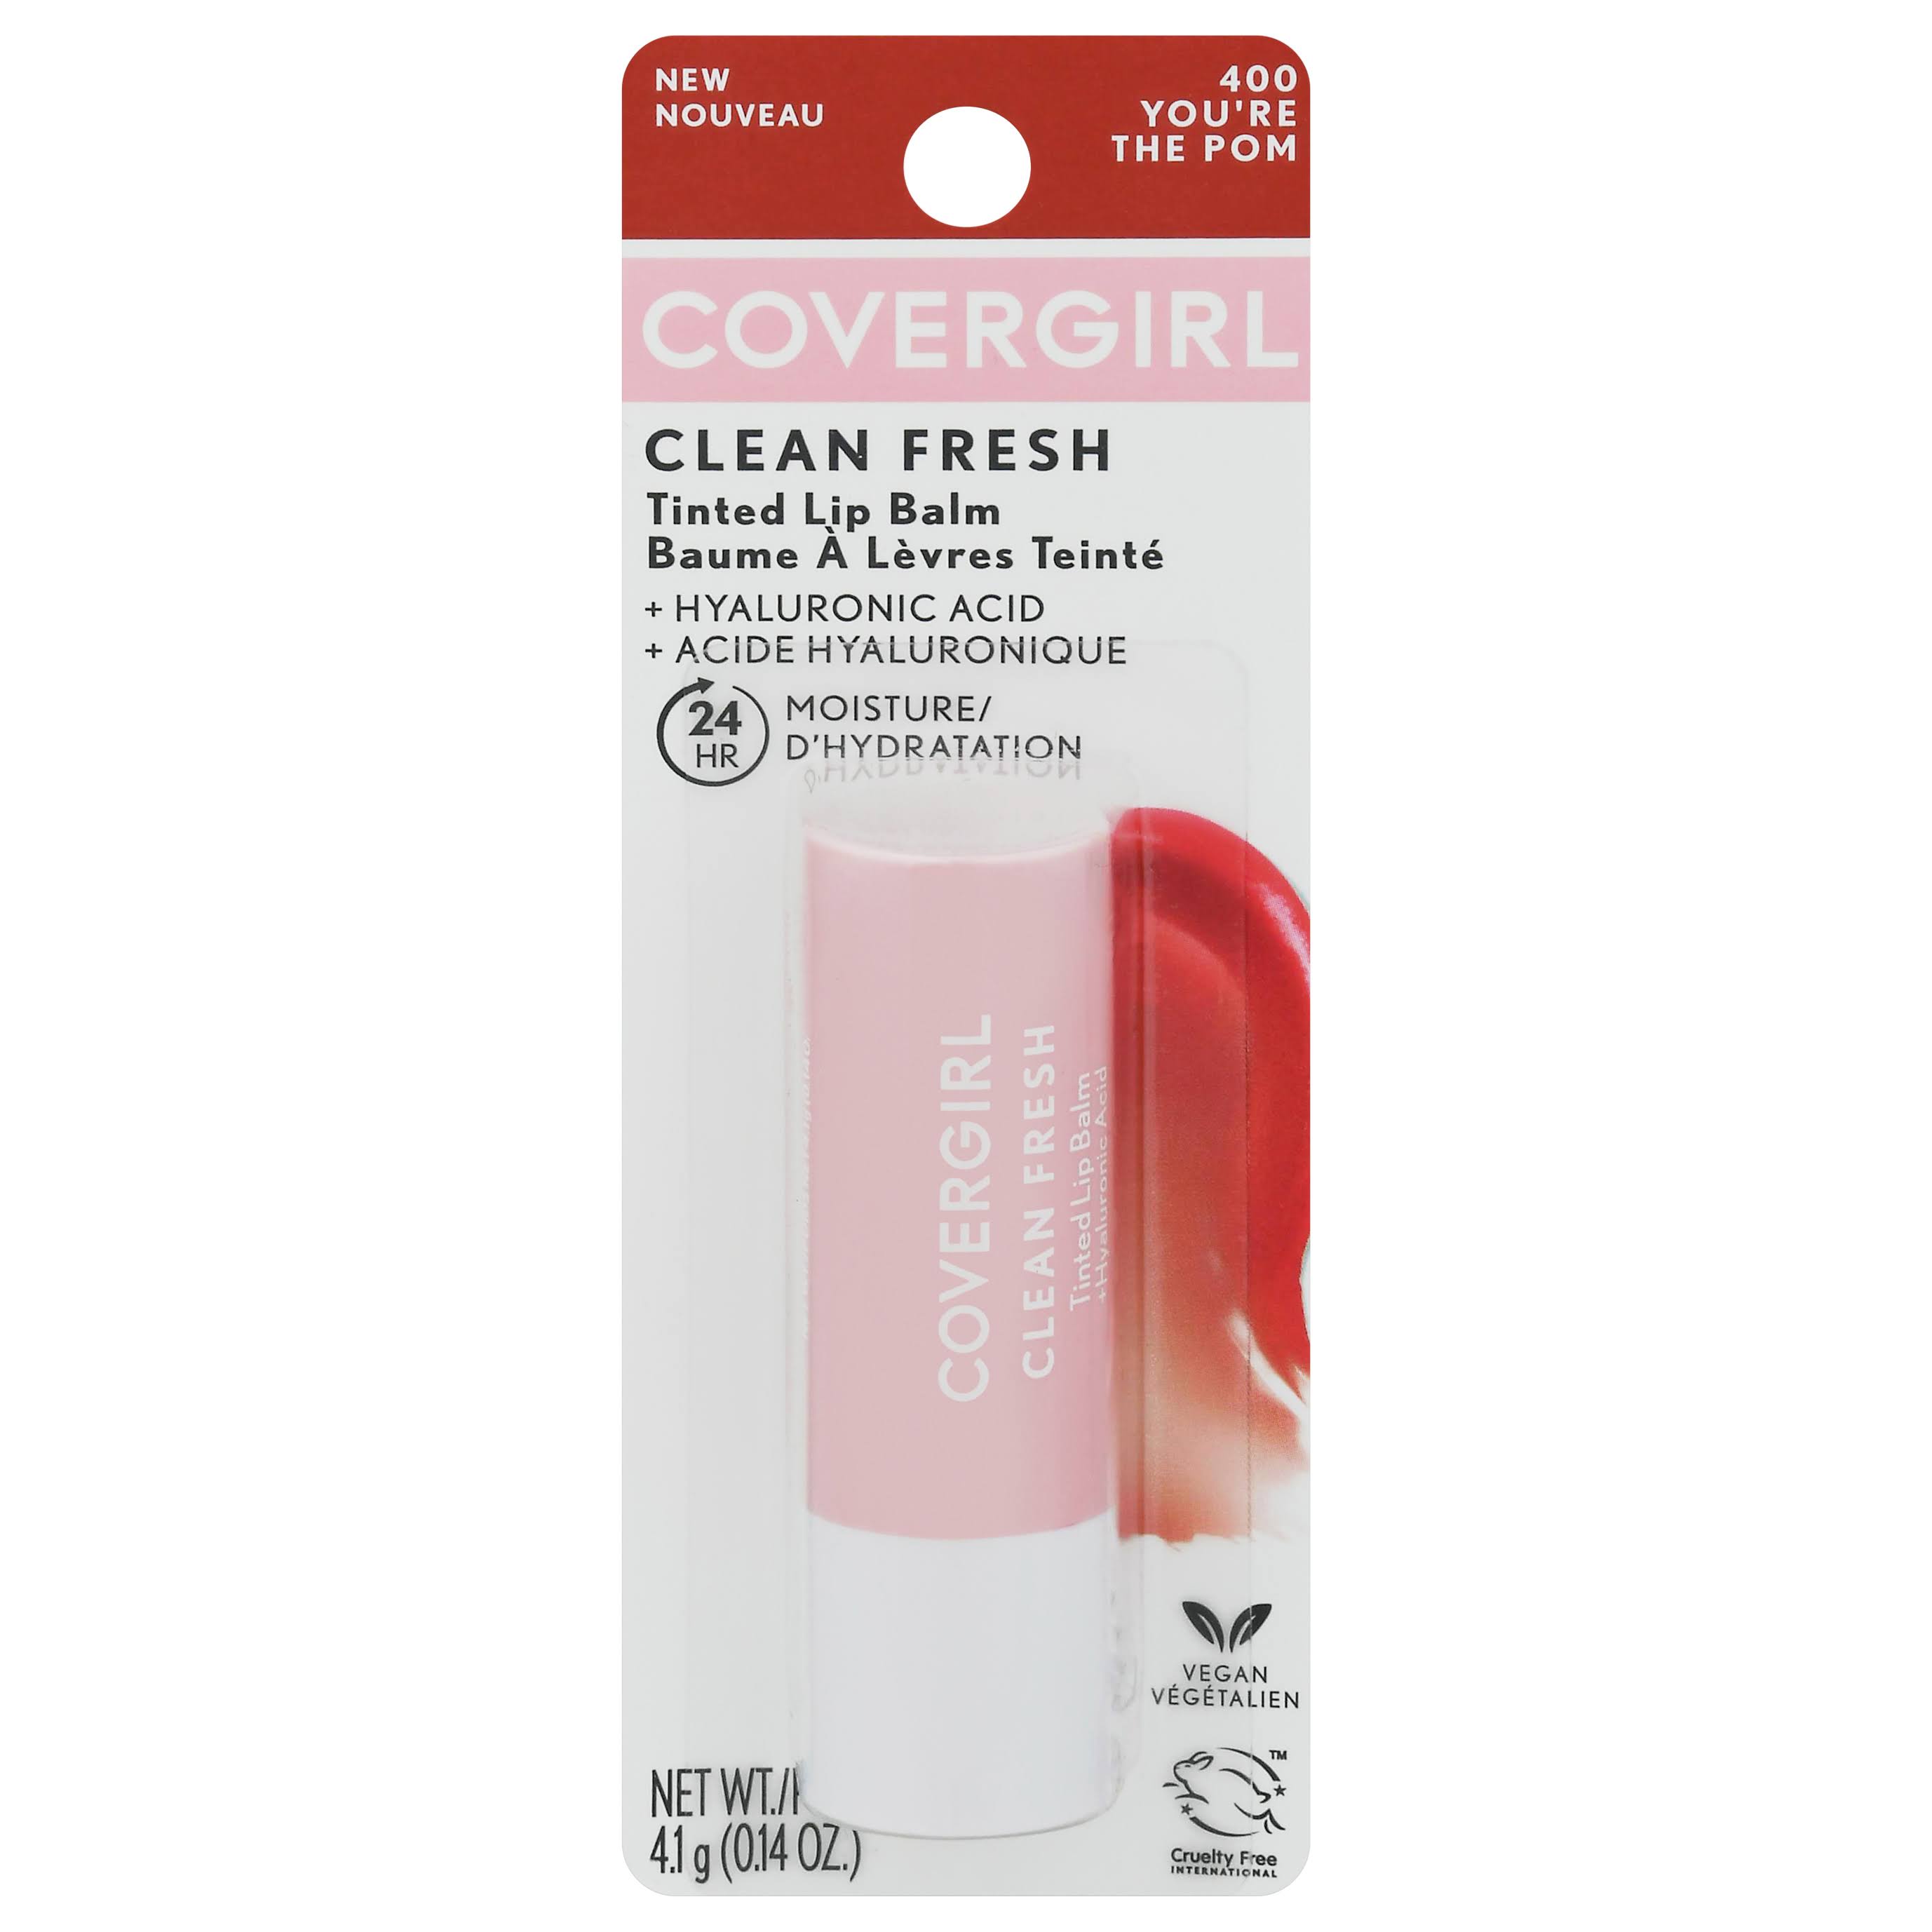 Covergirl Lip Balm, Tinted, You're the Pom 400, Clean Fresh - 4.1 g